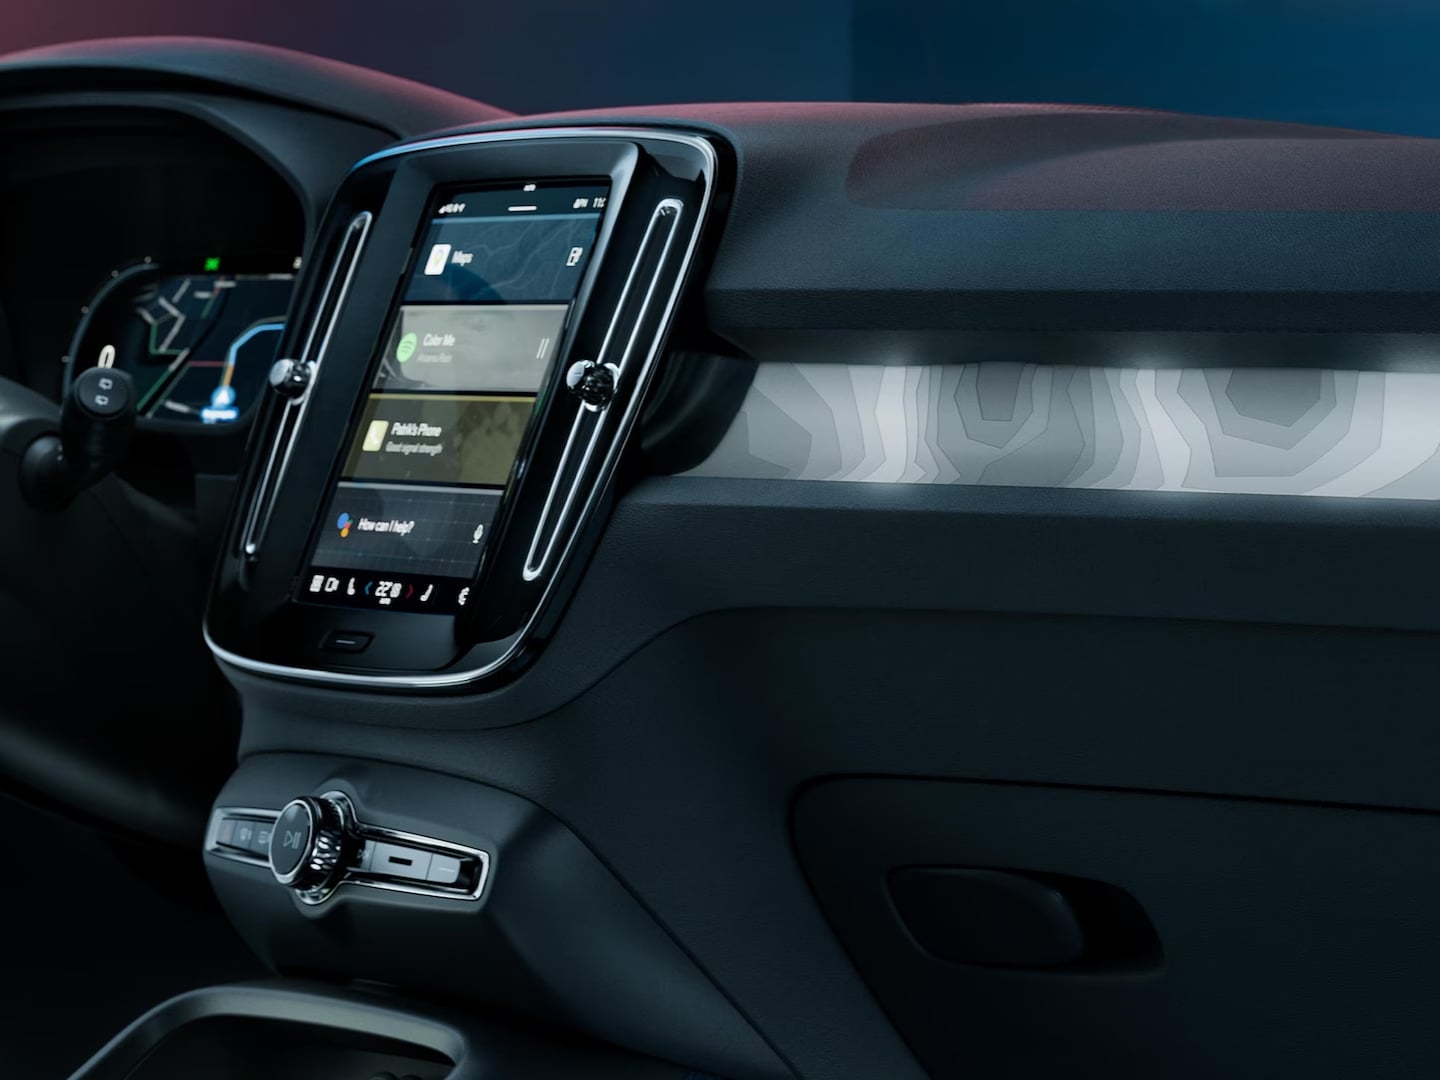 Front passenger view of center display and back-lit décor of the Volvo C40 Recharge.